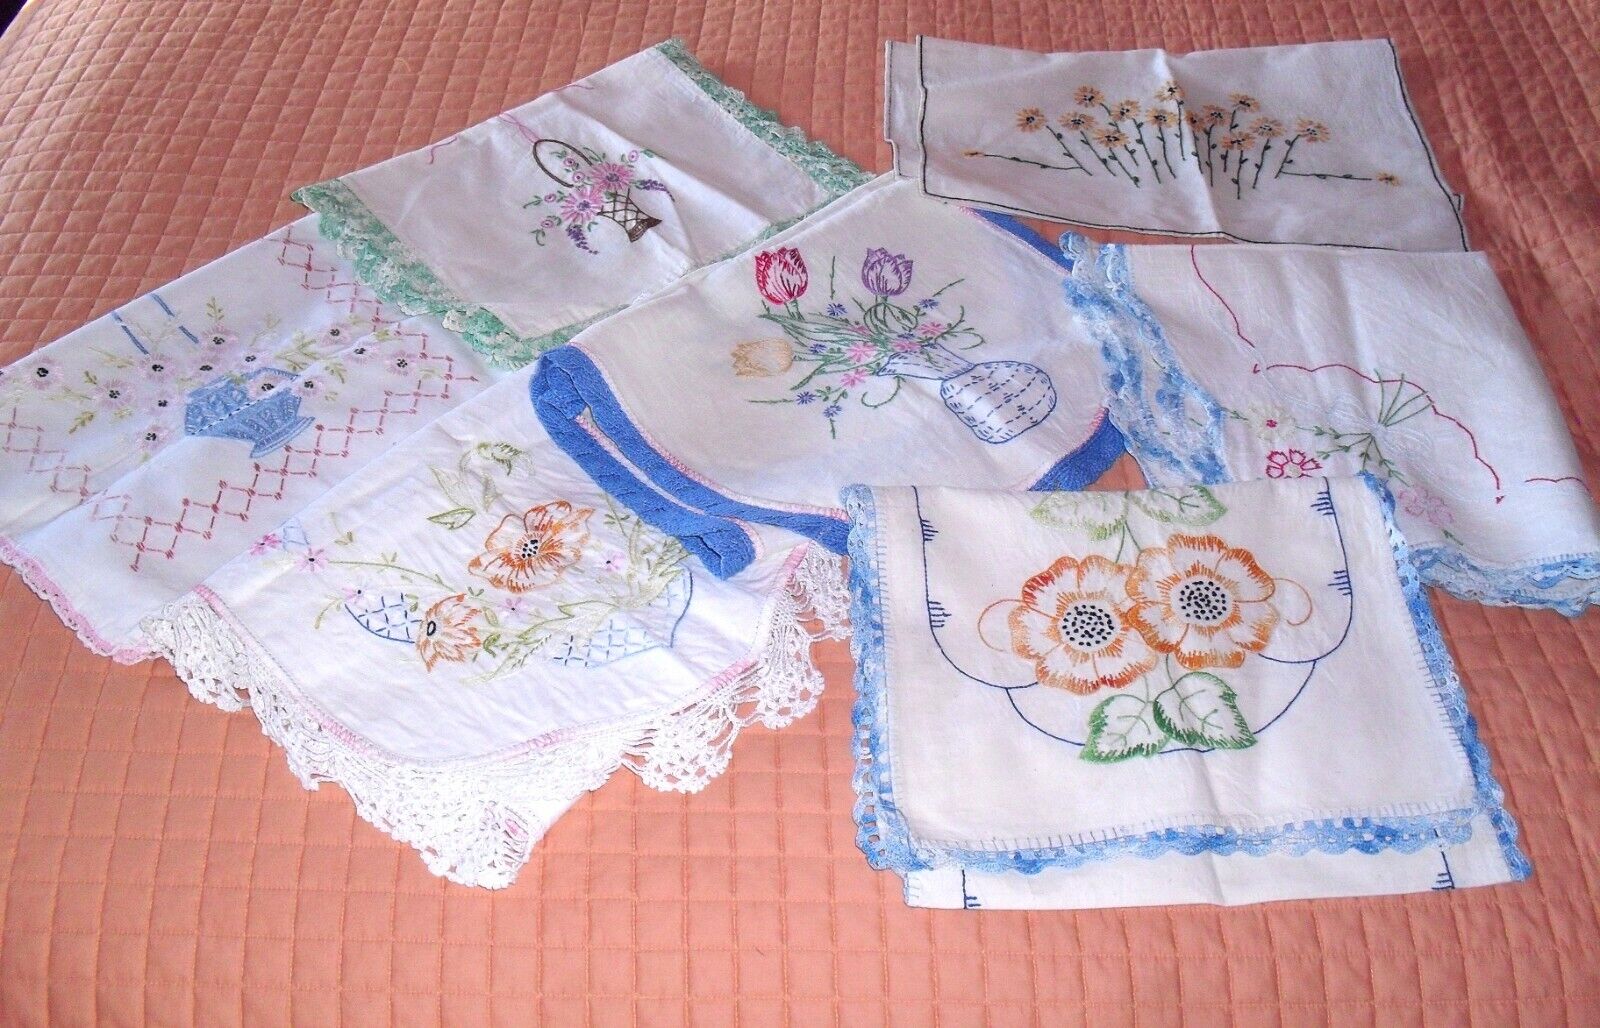 Lot of 7 Vintage Crocheted Embroidered Table Runners Dresser Scarves Lace Cloth